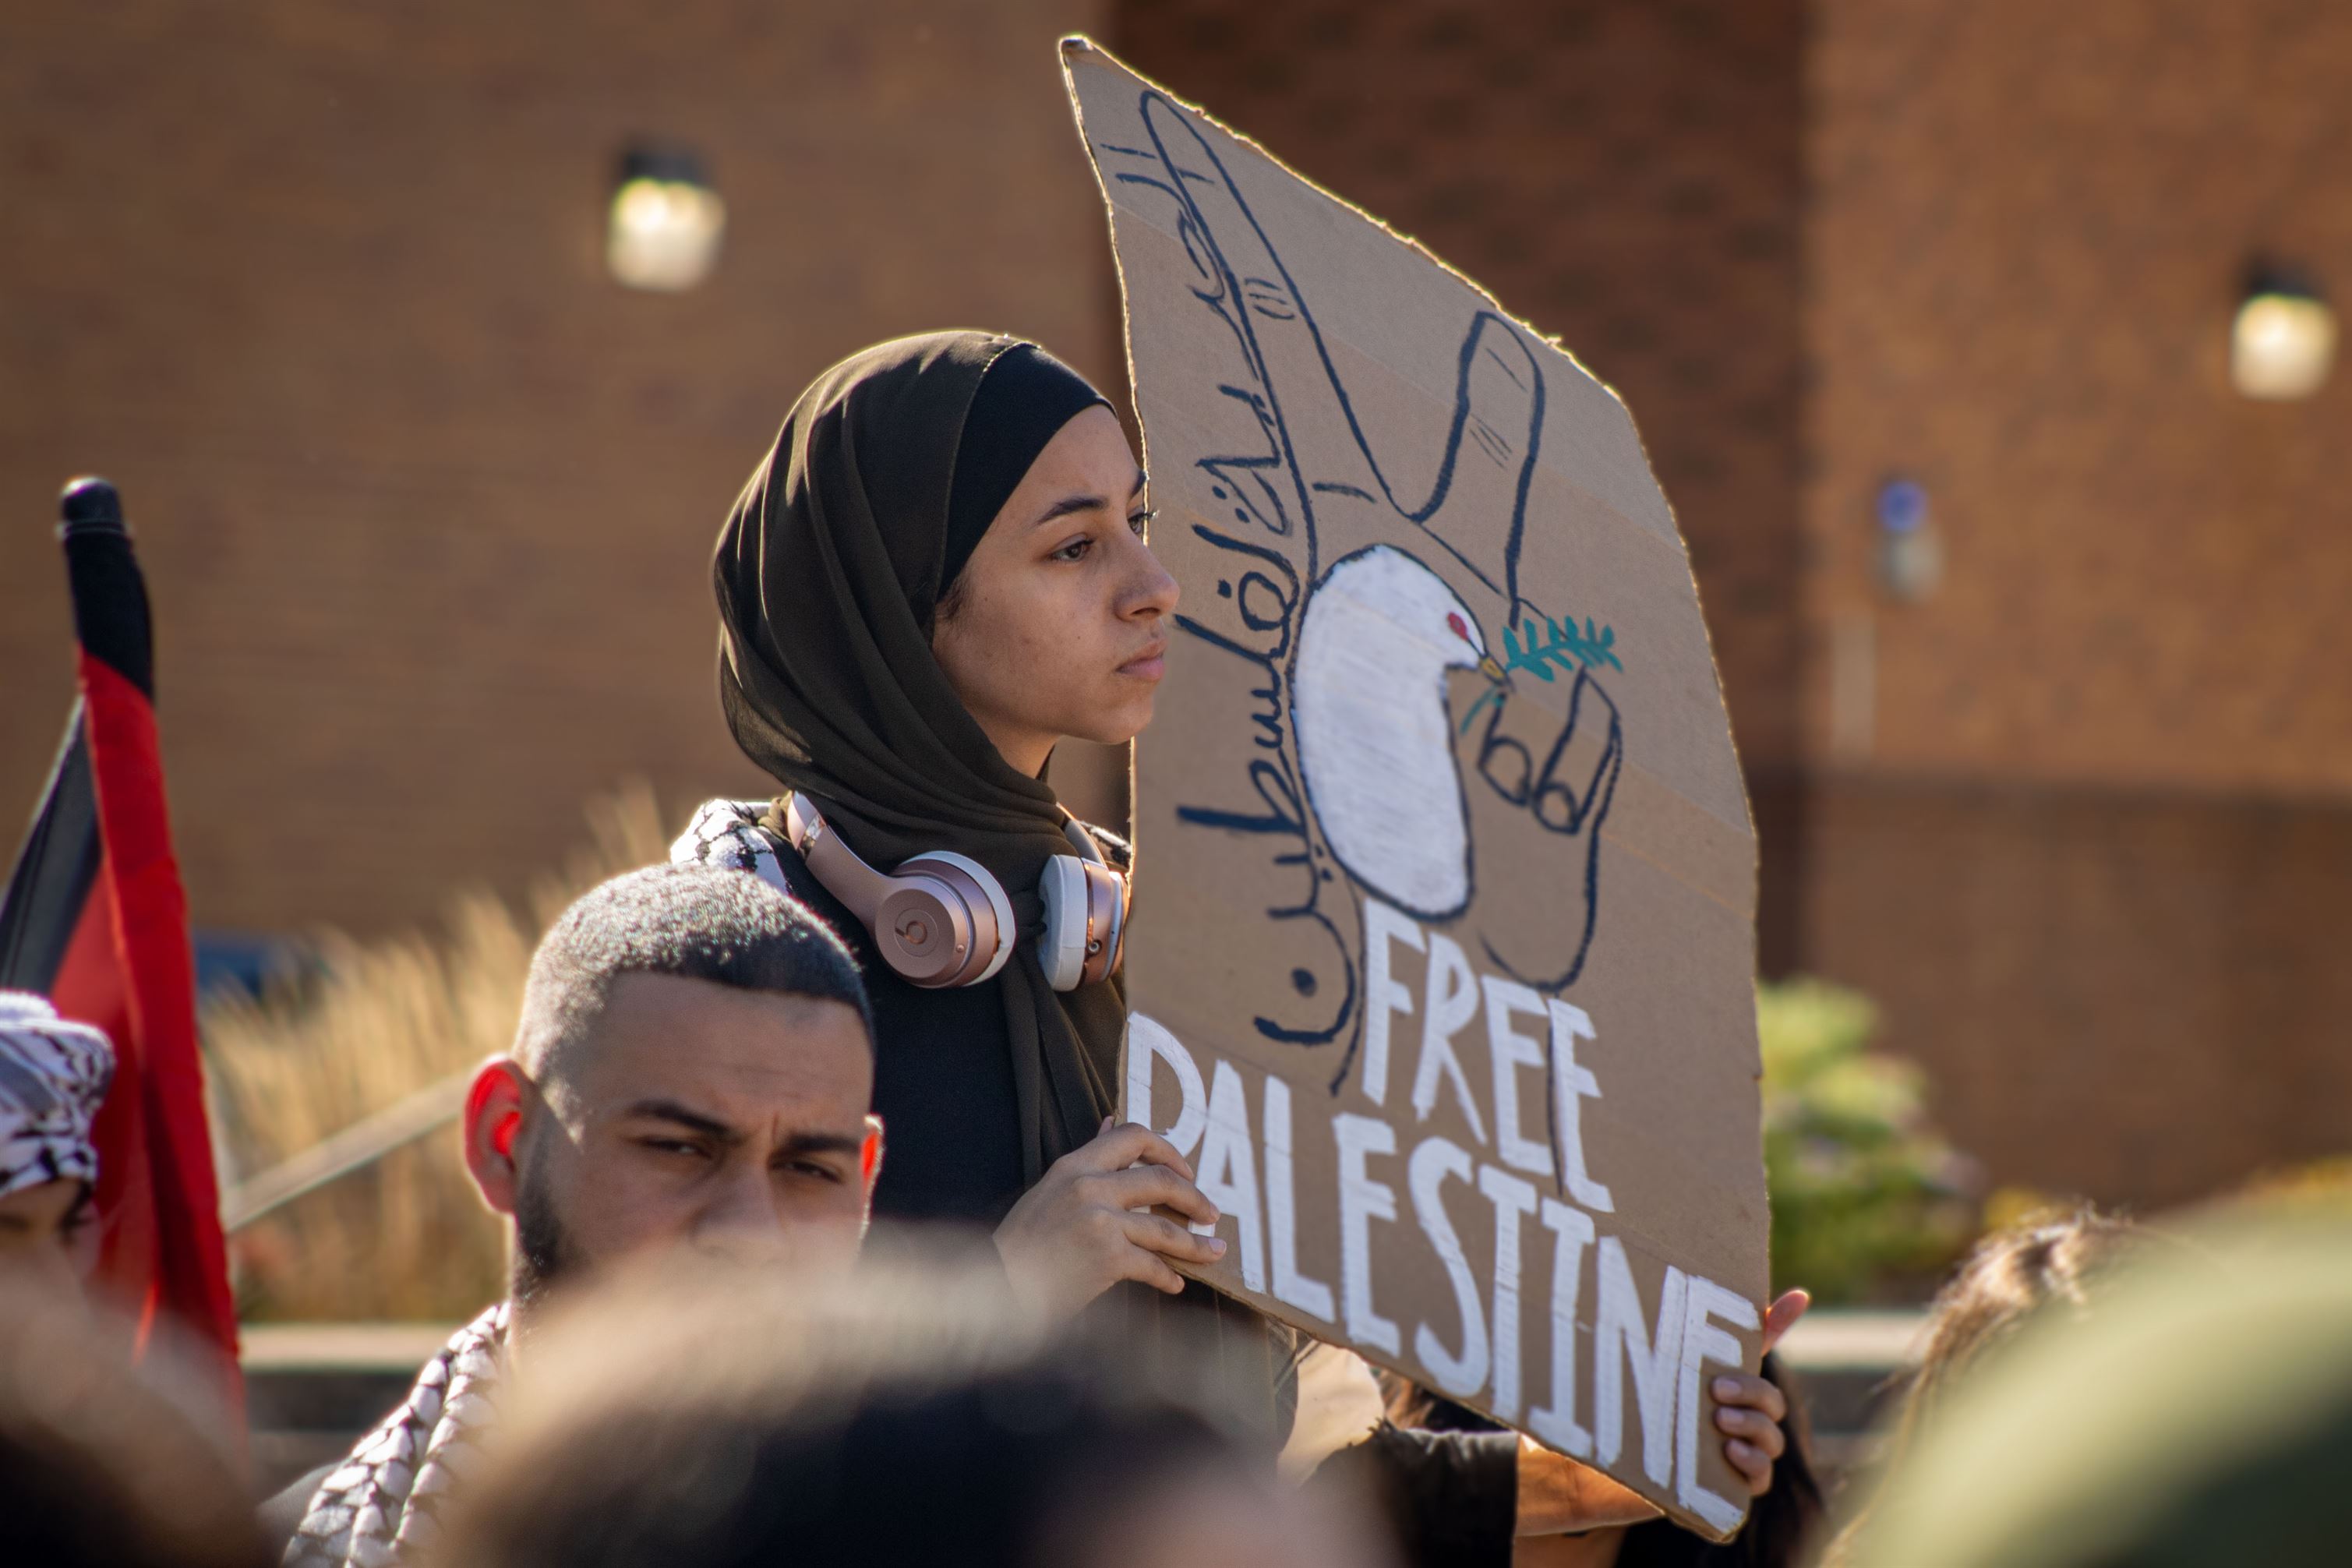 Someone holds up a poster that reads "Free Palestine," while protesting. Dani Mazariegos | The Montclarion